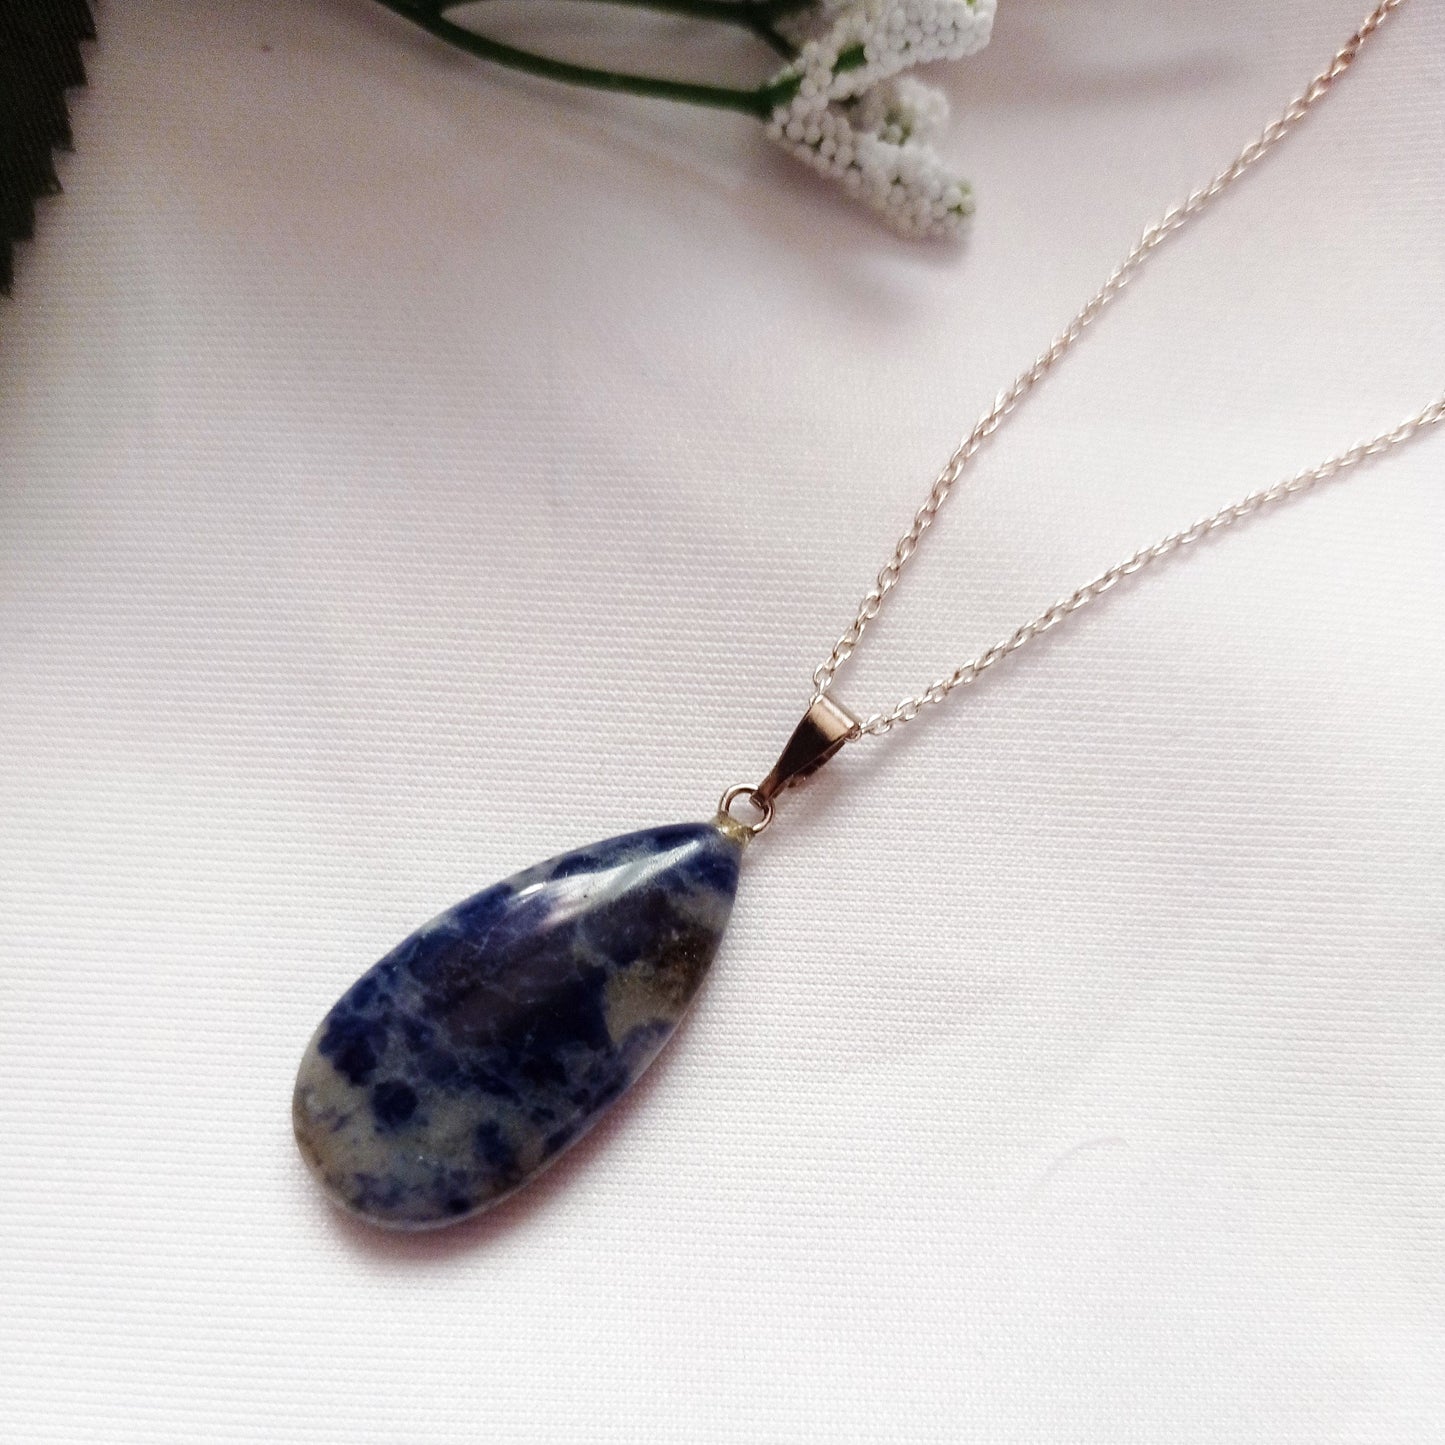 Sodalite Sterling Silver Necklace, Sodalite Pendant Necklace, Gemstone Necklace | by nlanlaVictory-3